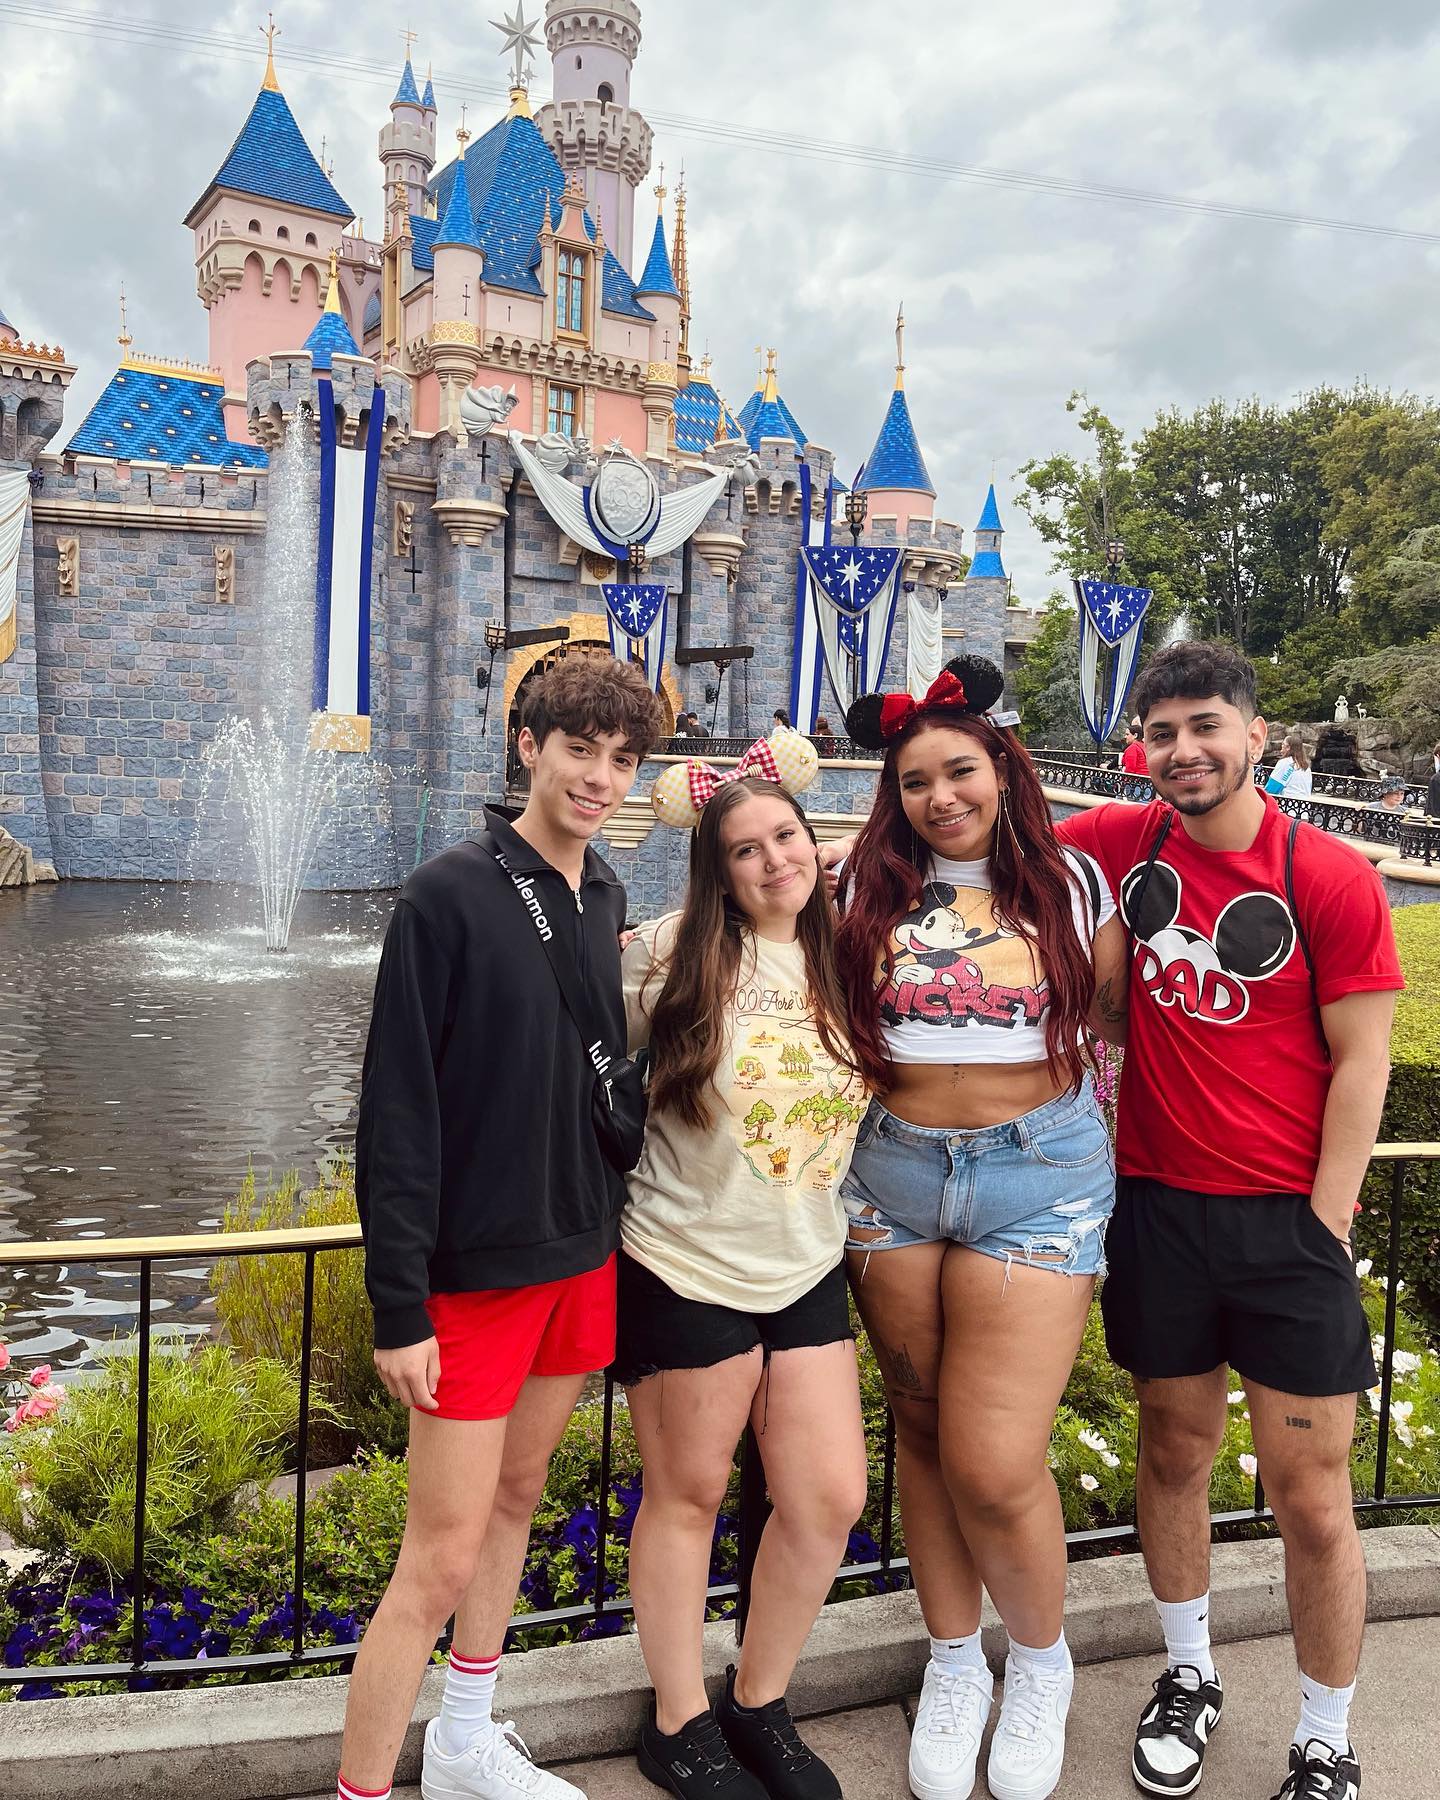 at the happiest place on earth with the people that make me the happiest 💫
•
•
•
#disneyland